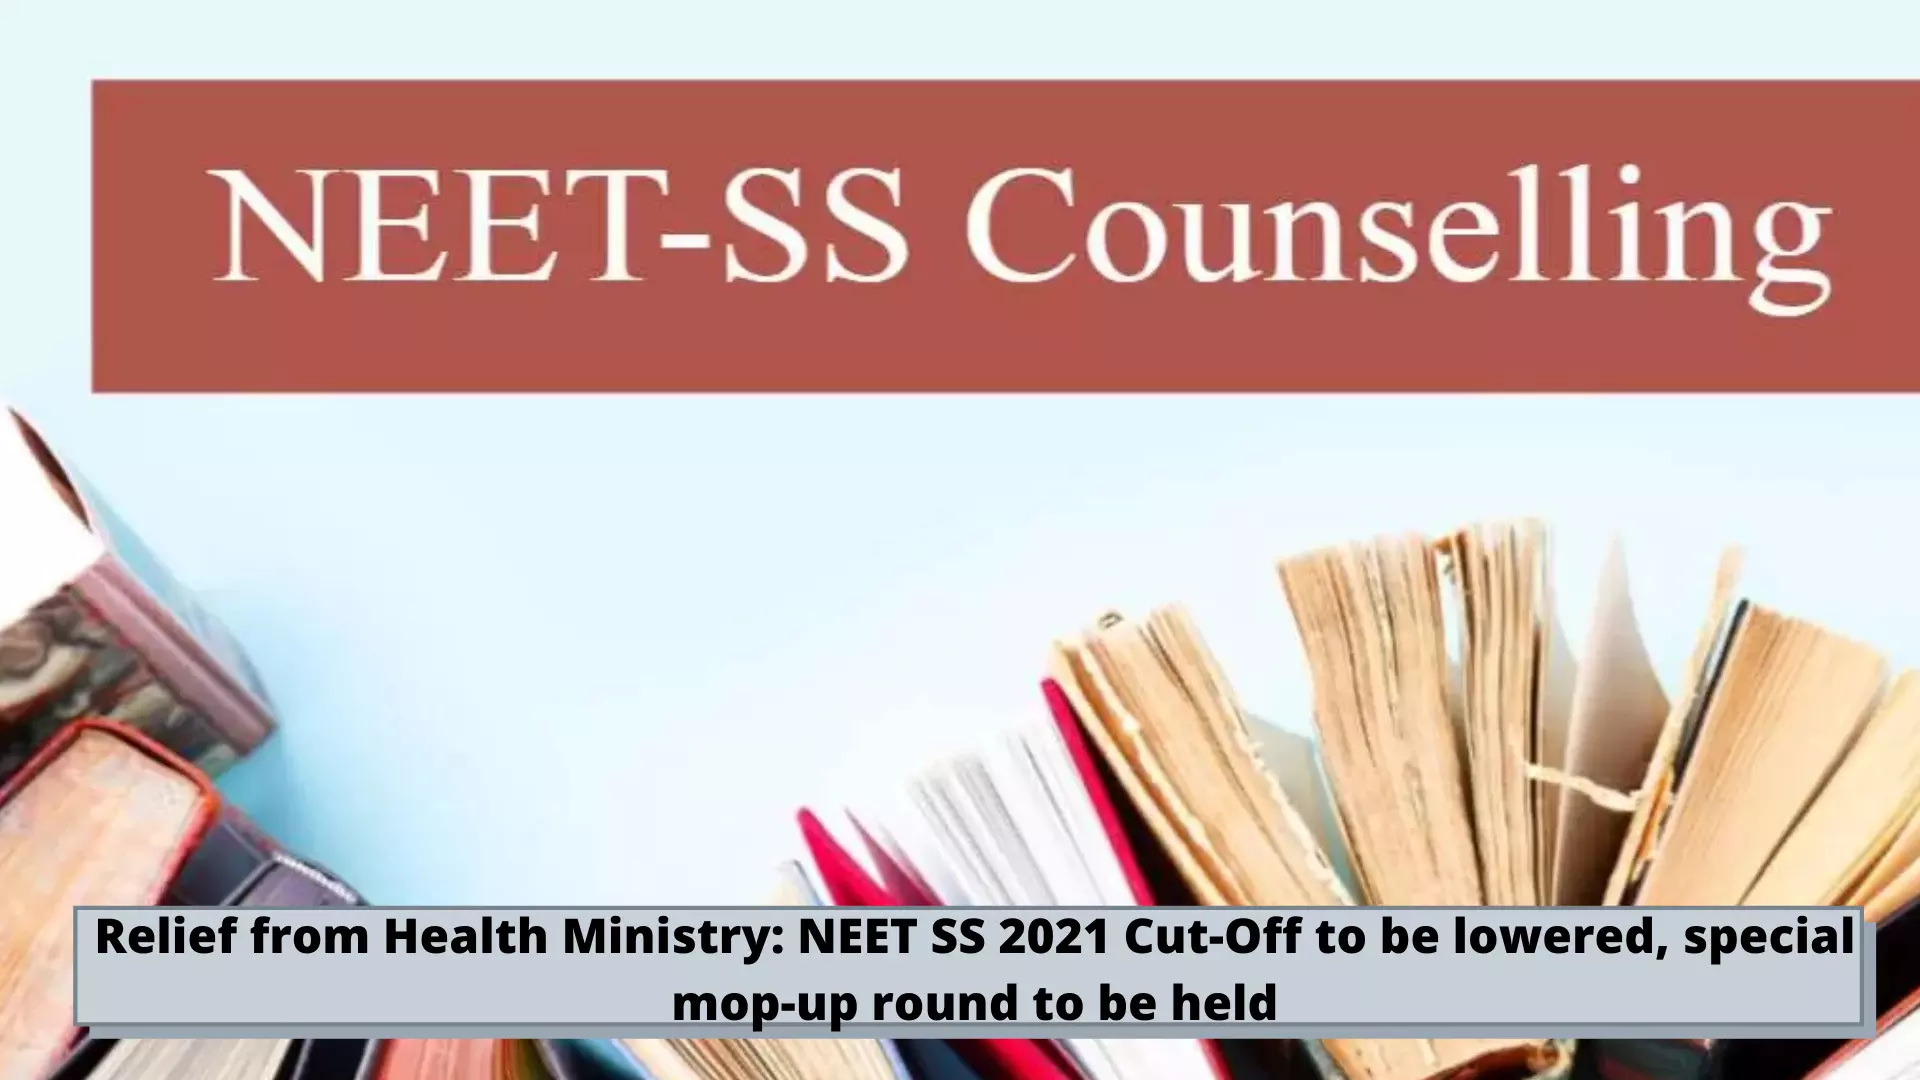 Relief from Health Ministry: NEET SS 2021 Cut-Off to be lowered, special mop-up round to be held